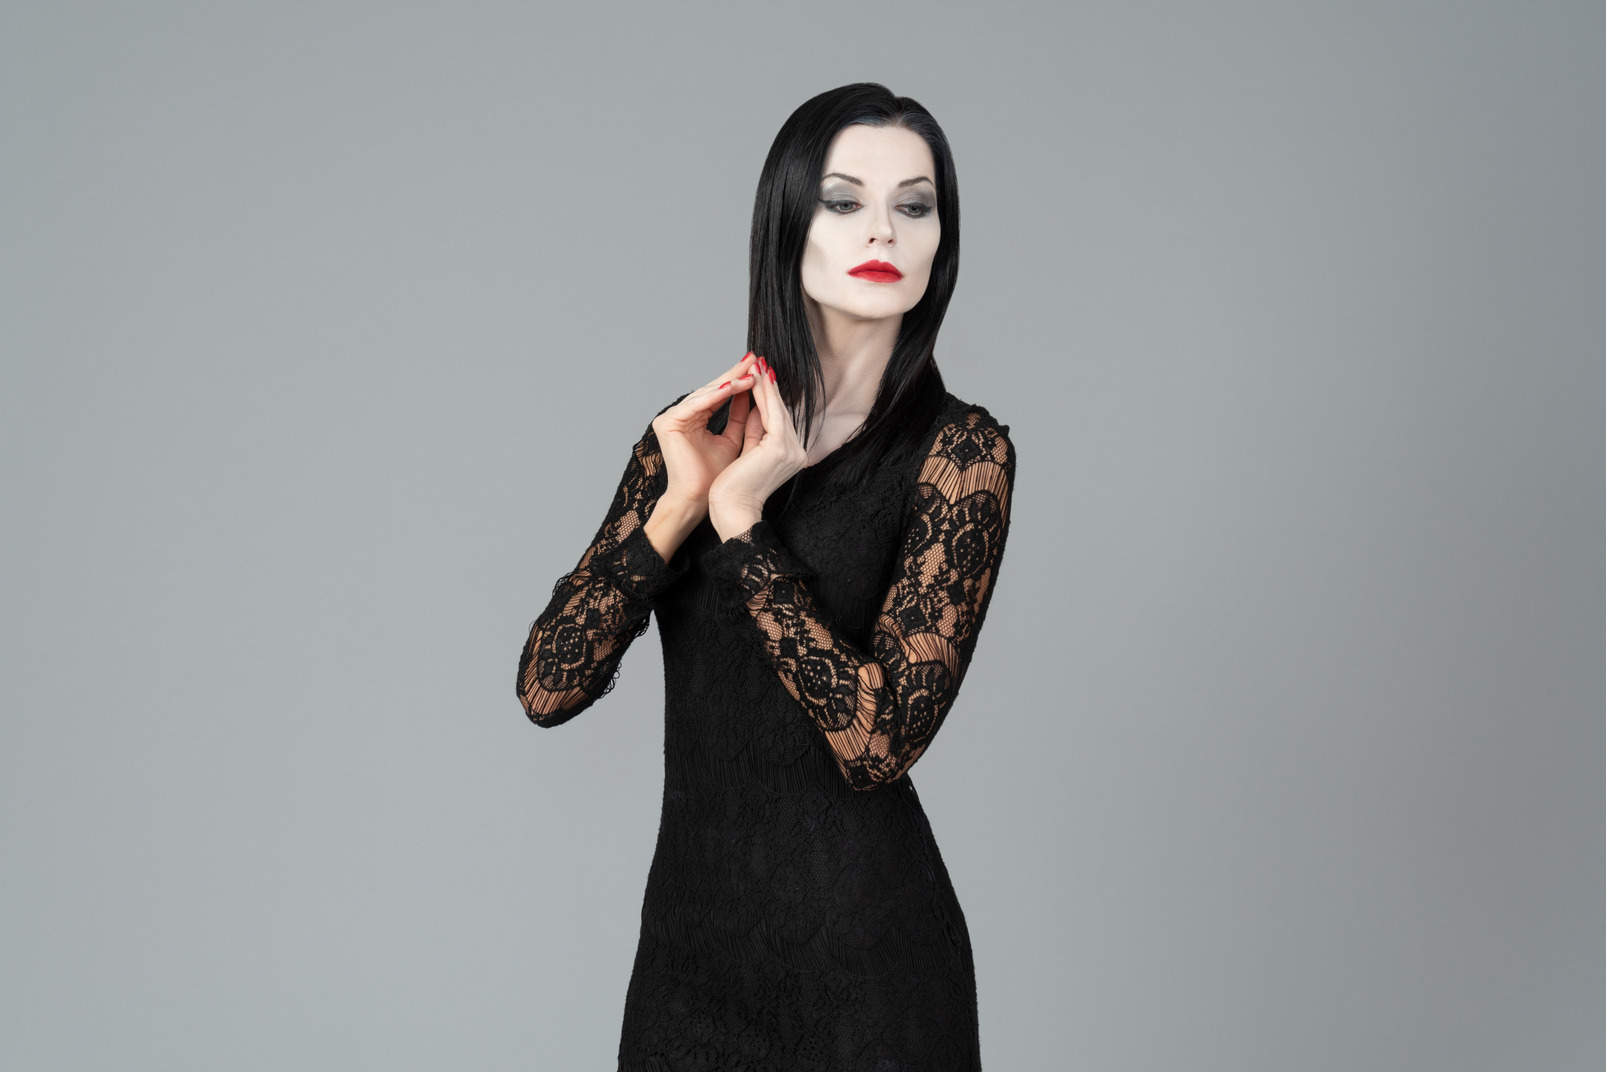 Morticia is thinking about a plan